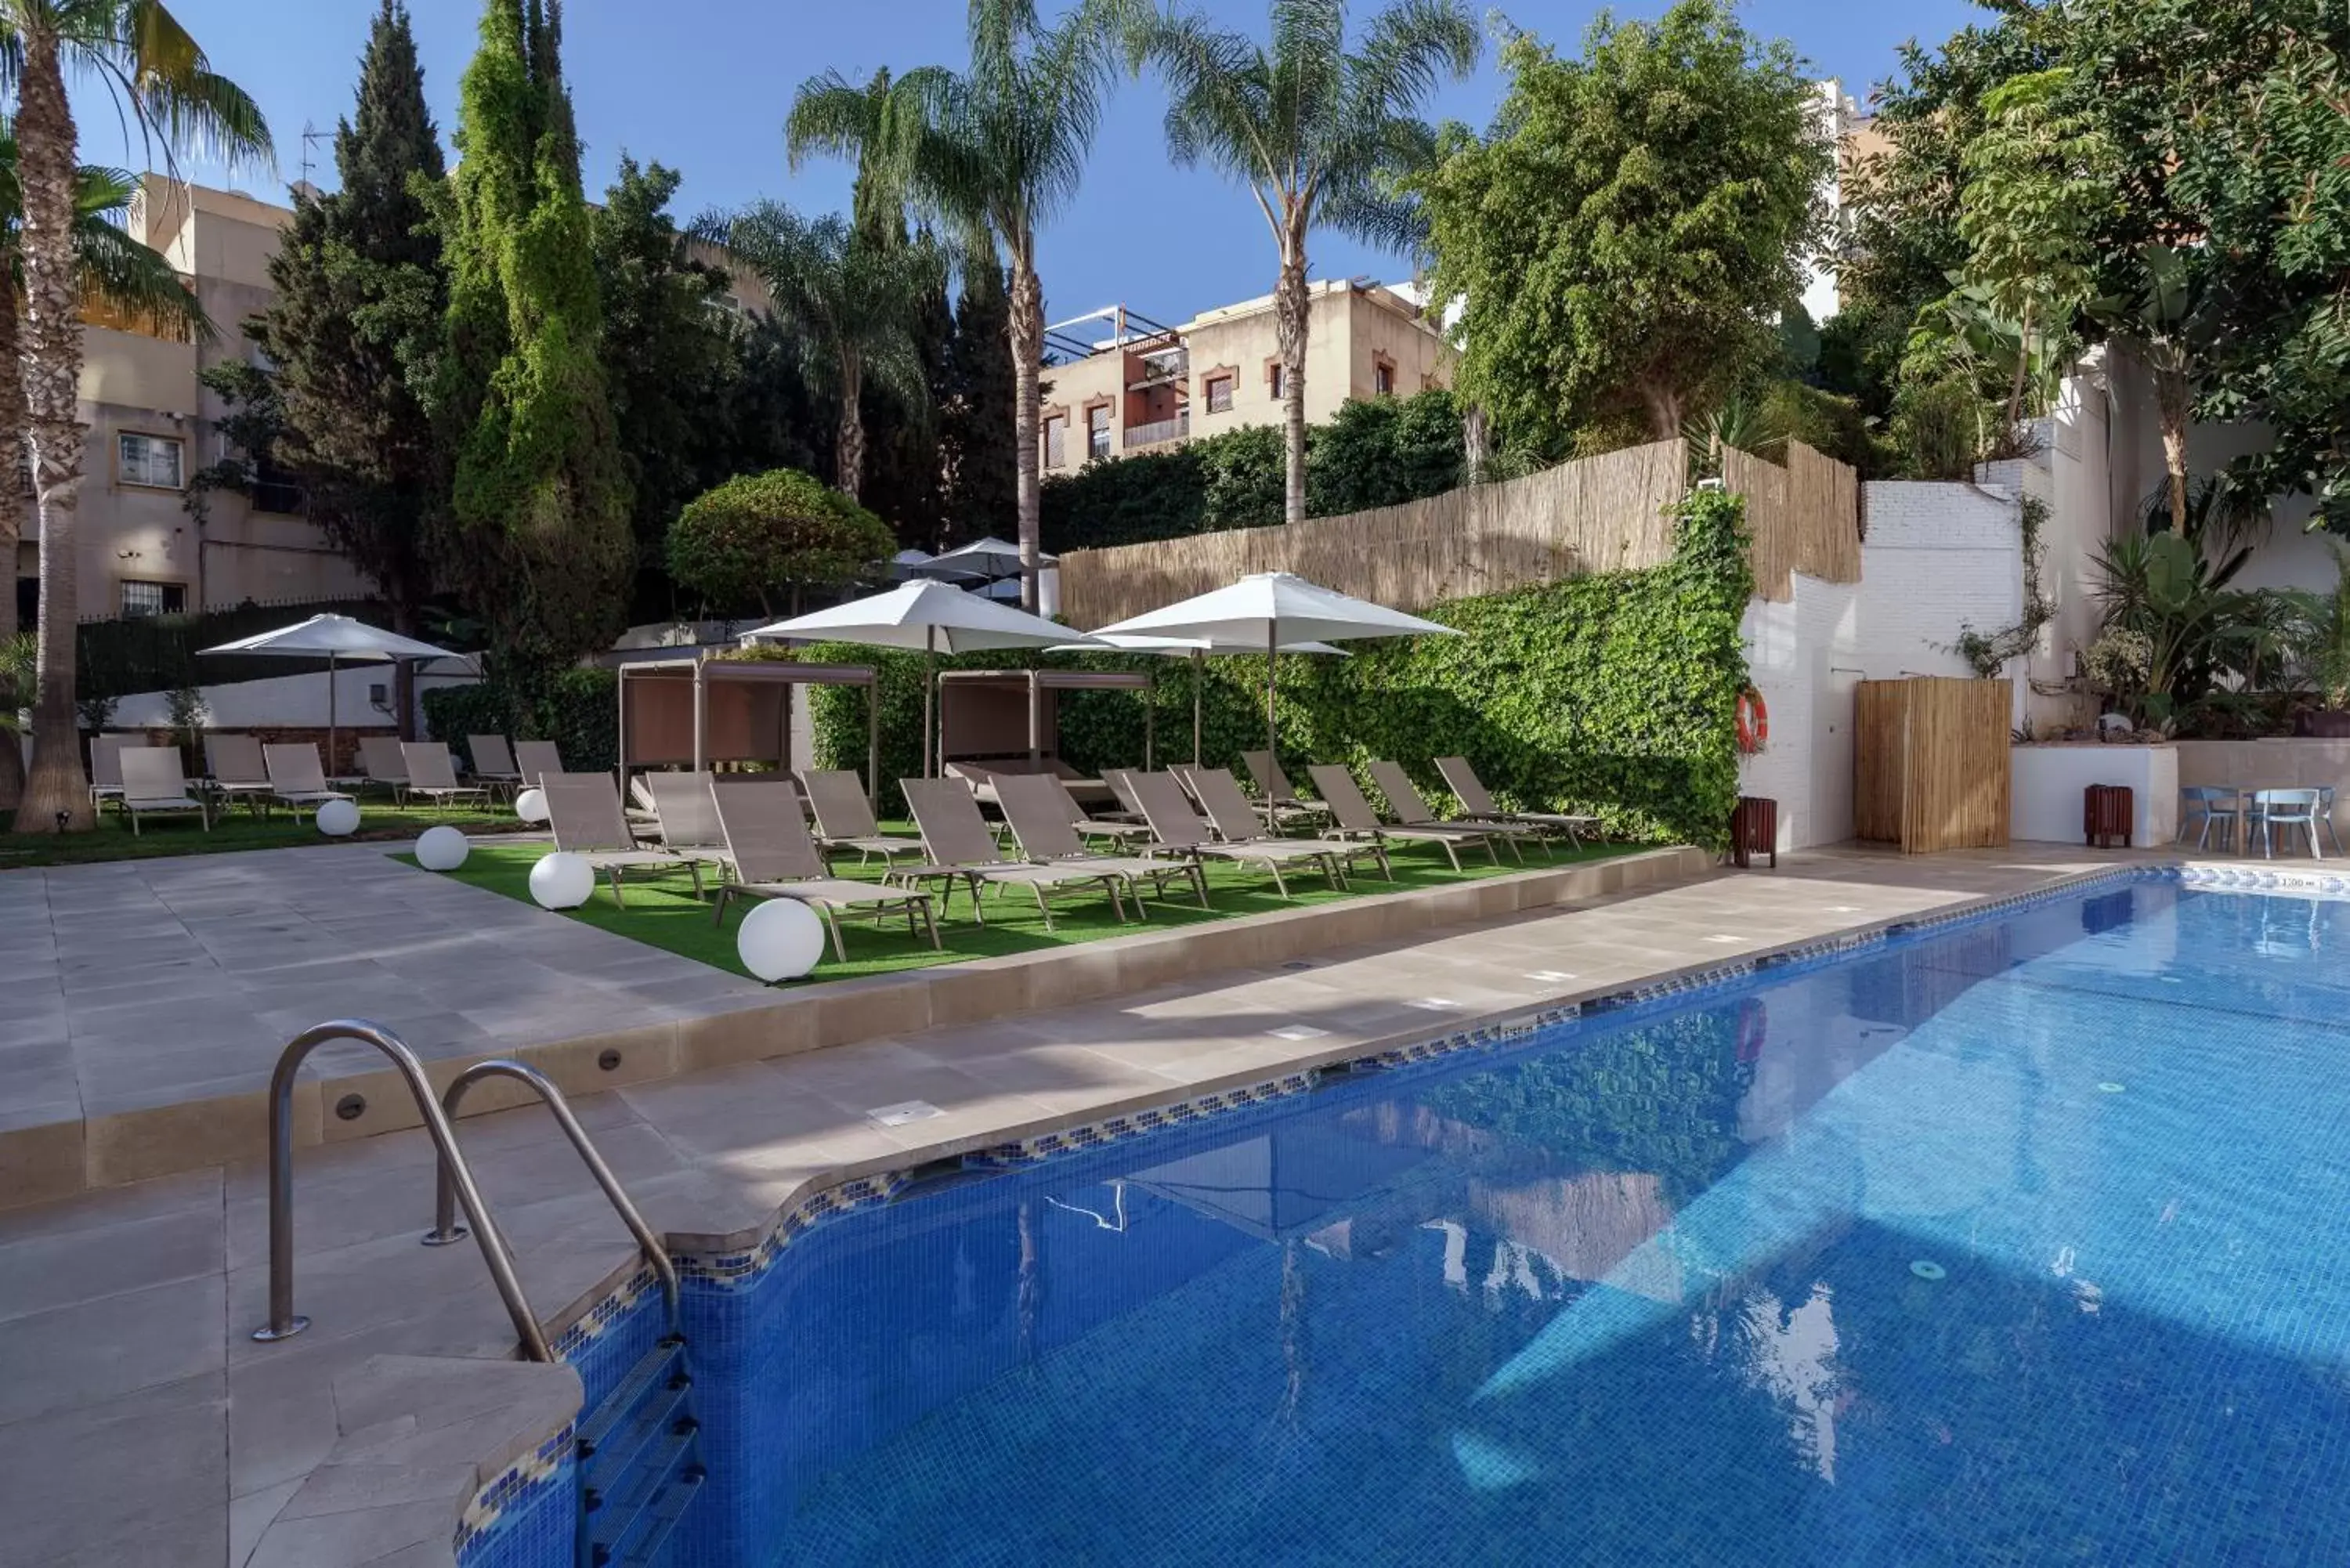 Swimming Pool in AluaSoul Costa Malaga - Adults recommended